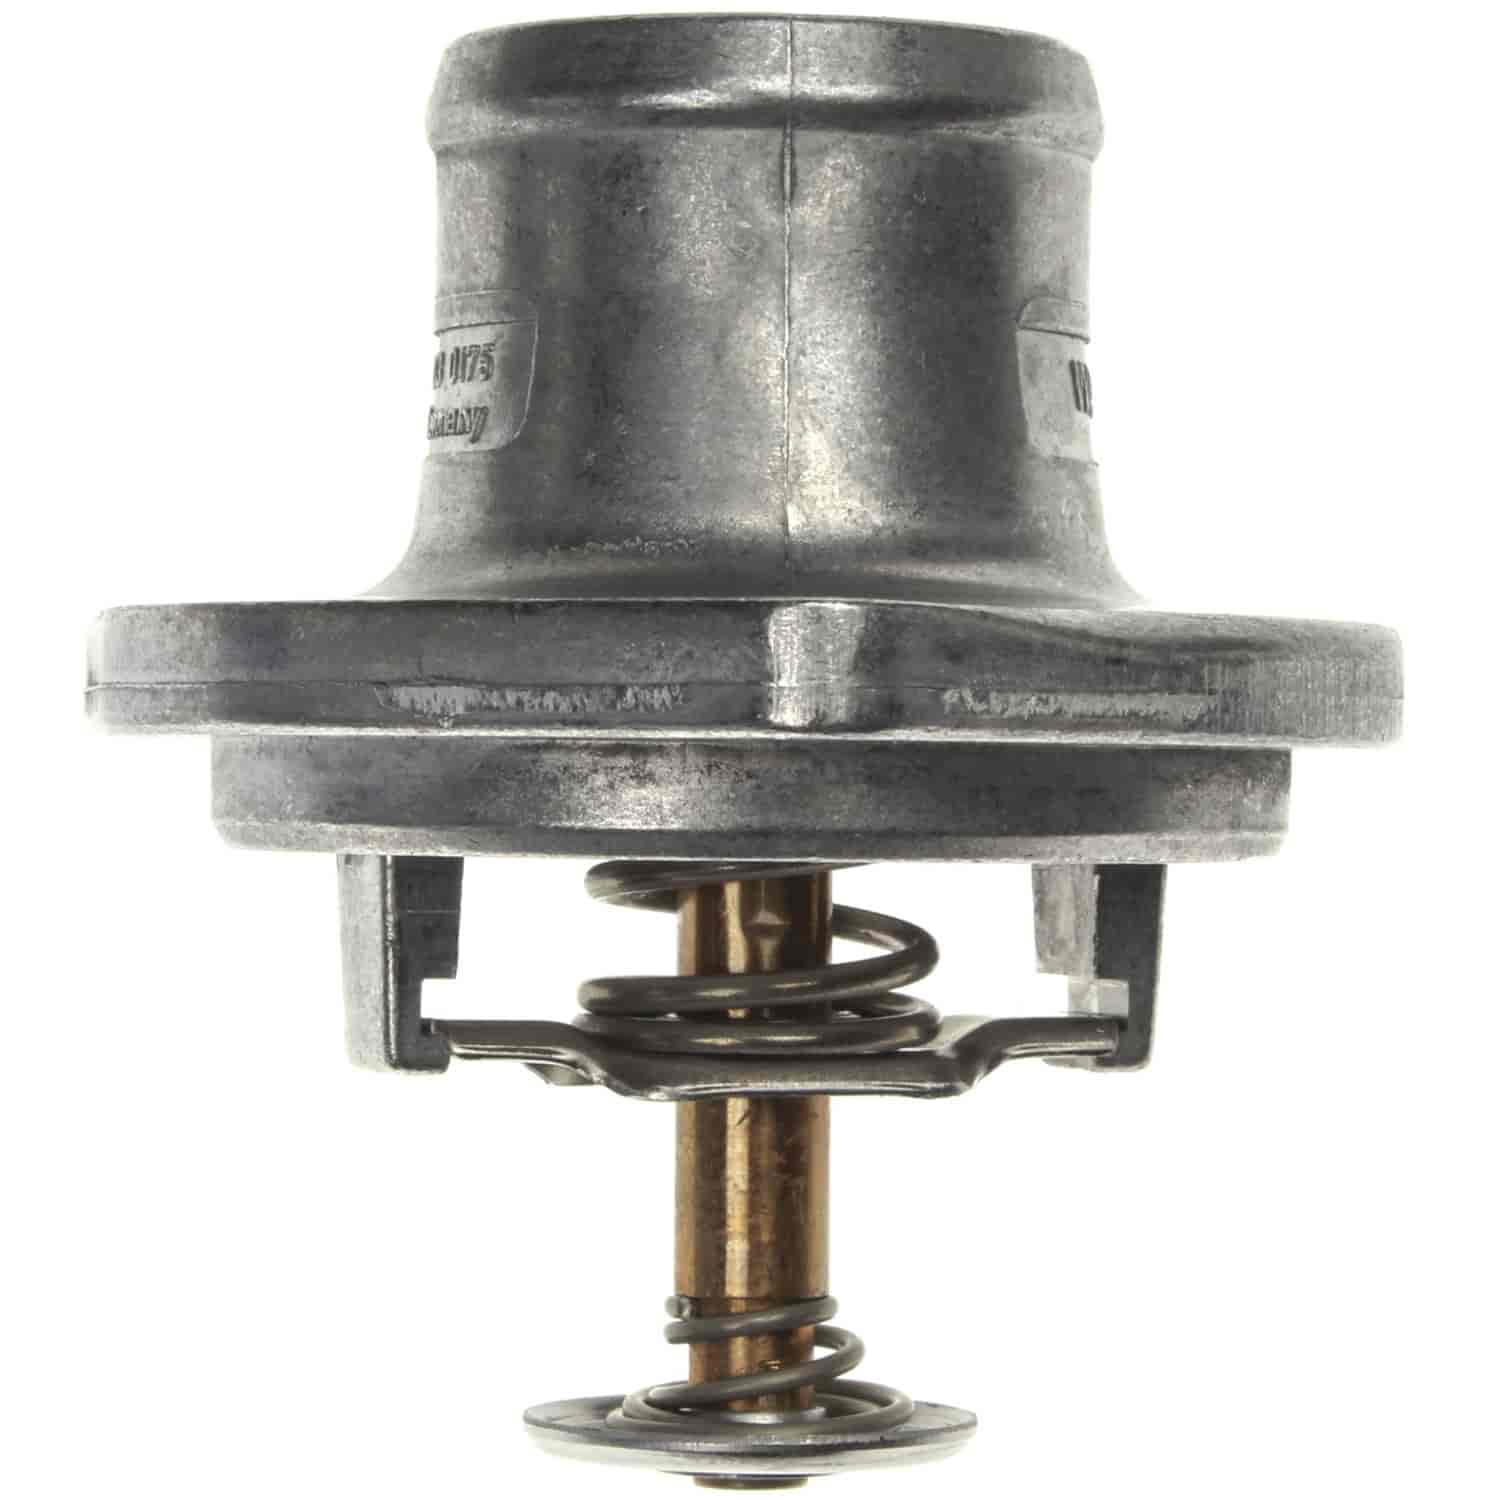 Integral Thermostat 1992-1999 Various Mercedes-Benz Models with